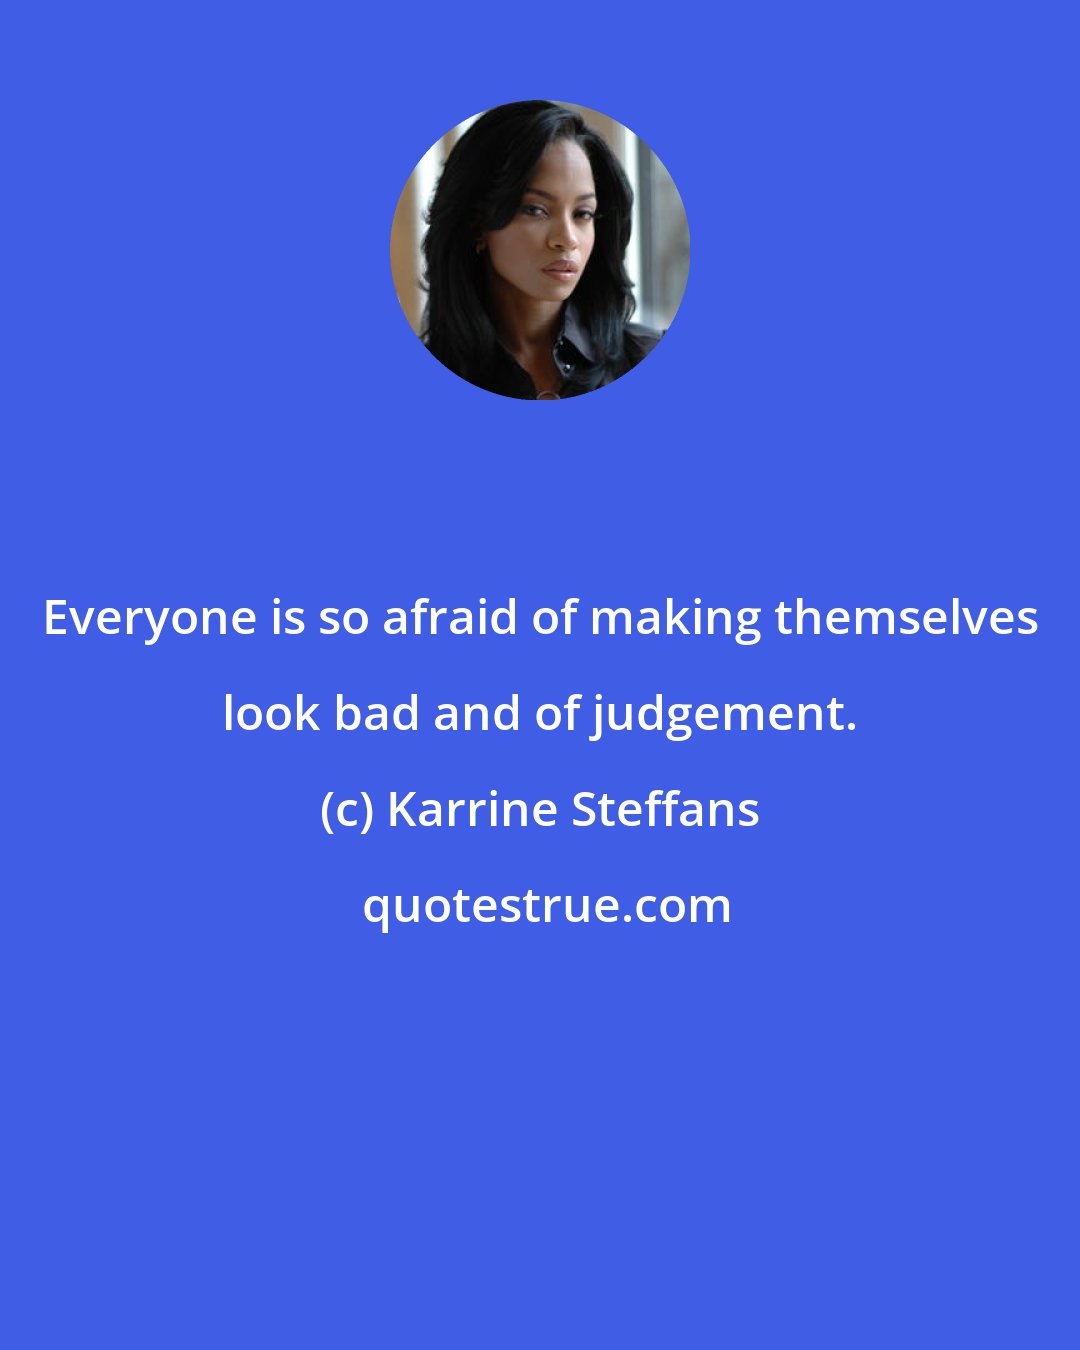 Karrine Steffans: Everyone is so afraid of making themselves look bad and of judgement.